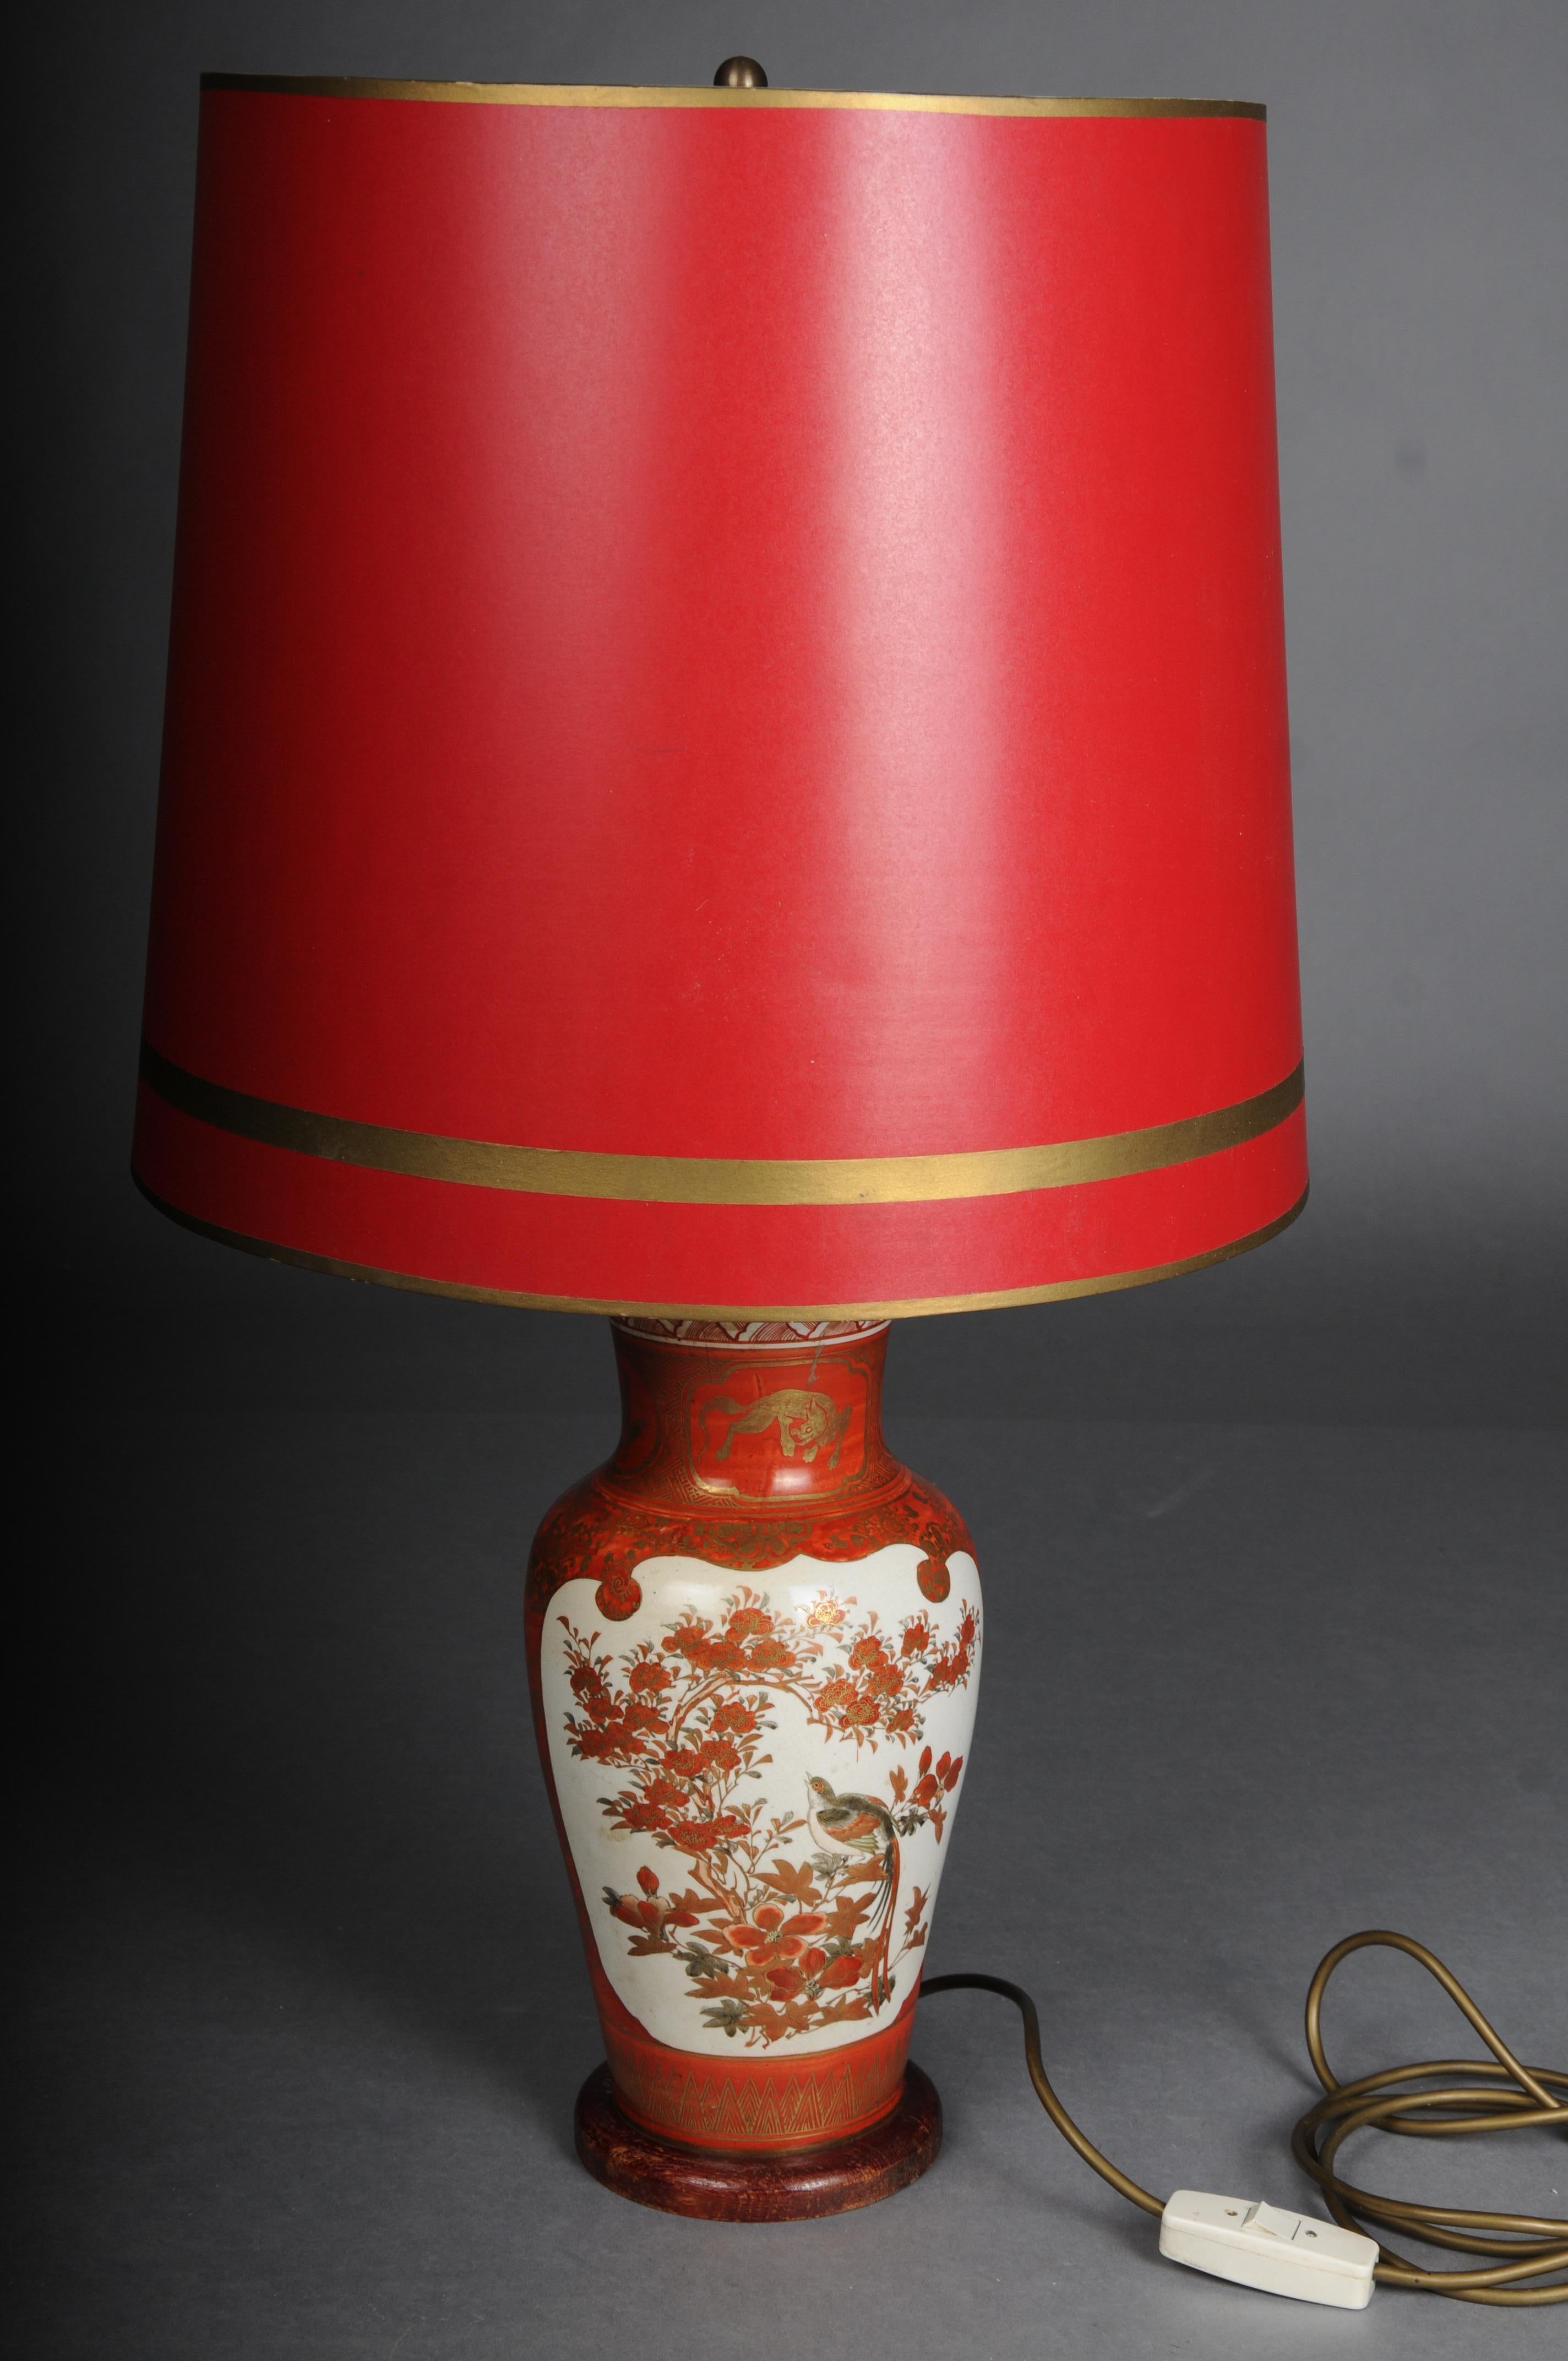 Old Asian porcelain table lamp, red with shade, electrified

Beautiful old Asian table lamp, red background with gold ornaments. In the center on a white background, fine floral painting on both sides.
Eltrified with 2 light bulb sockets and a